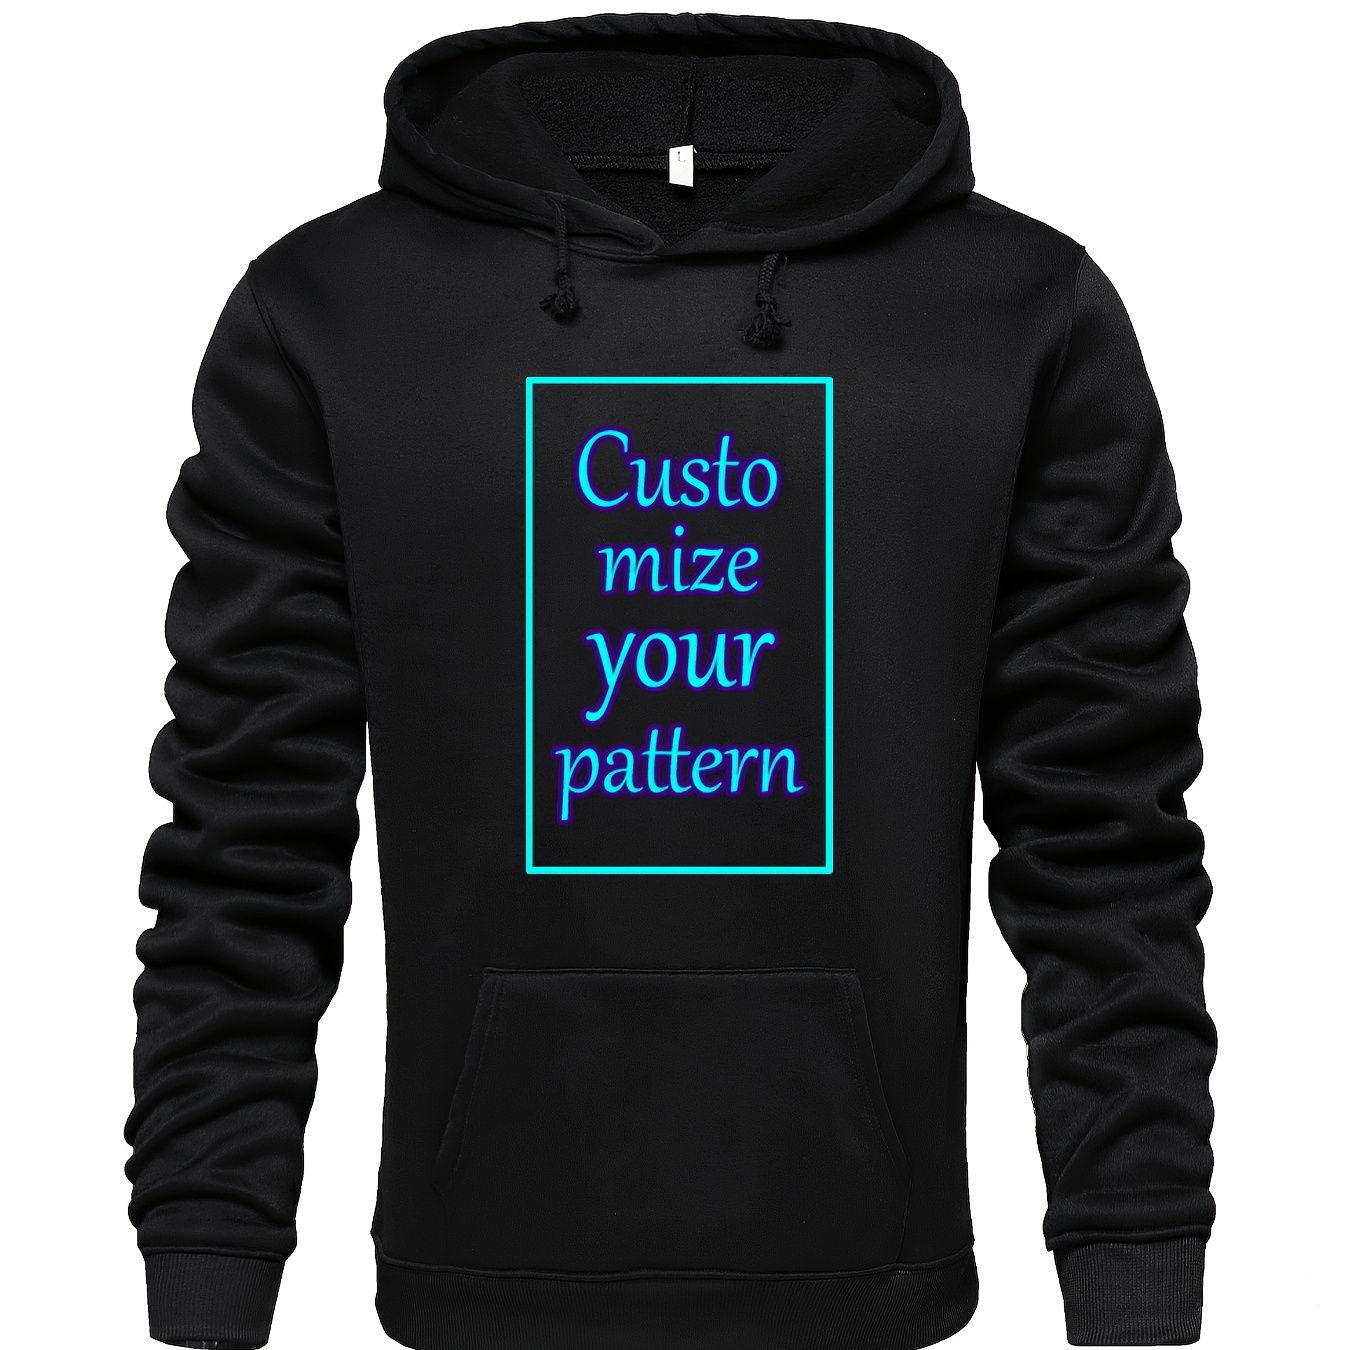 

Customized Patterns Print Men's Pullover Round Neck Hoodies With Kangaroo Pocket Long Sleeve Hooded Sweatshirt Loose Casual Top For Autumn Winter Men's Clothing As Gifts